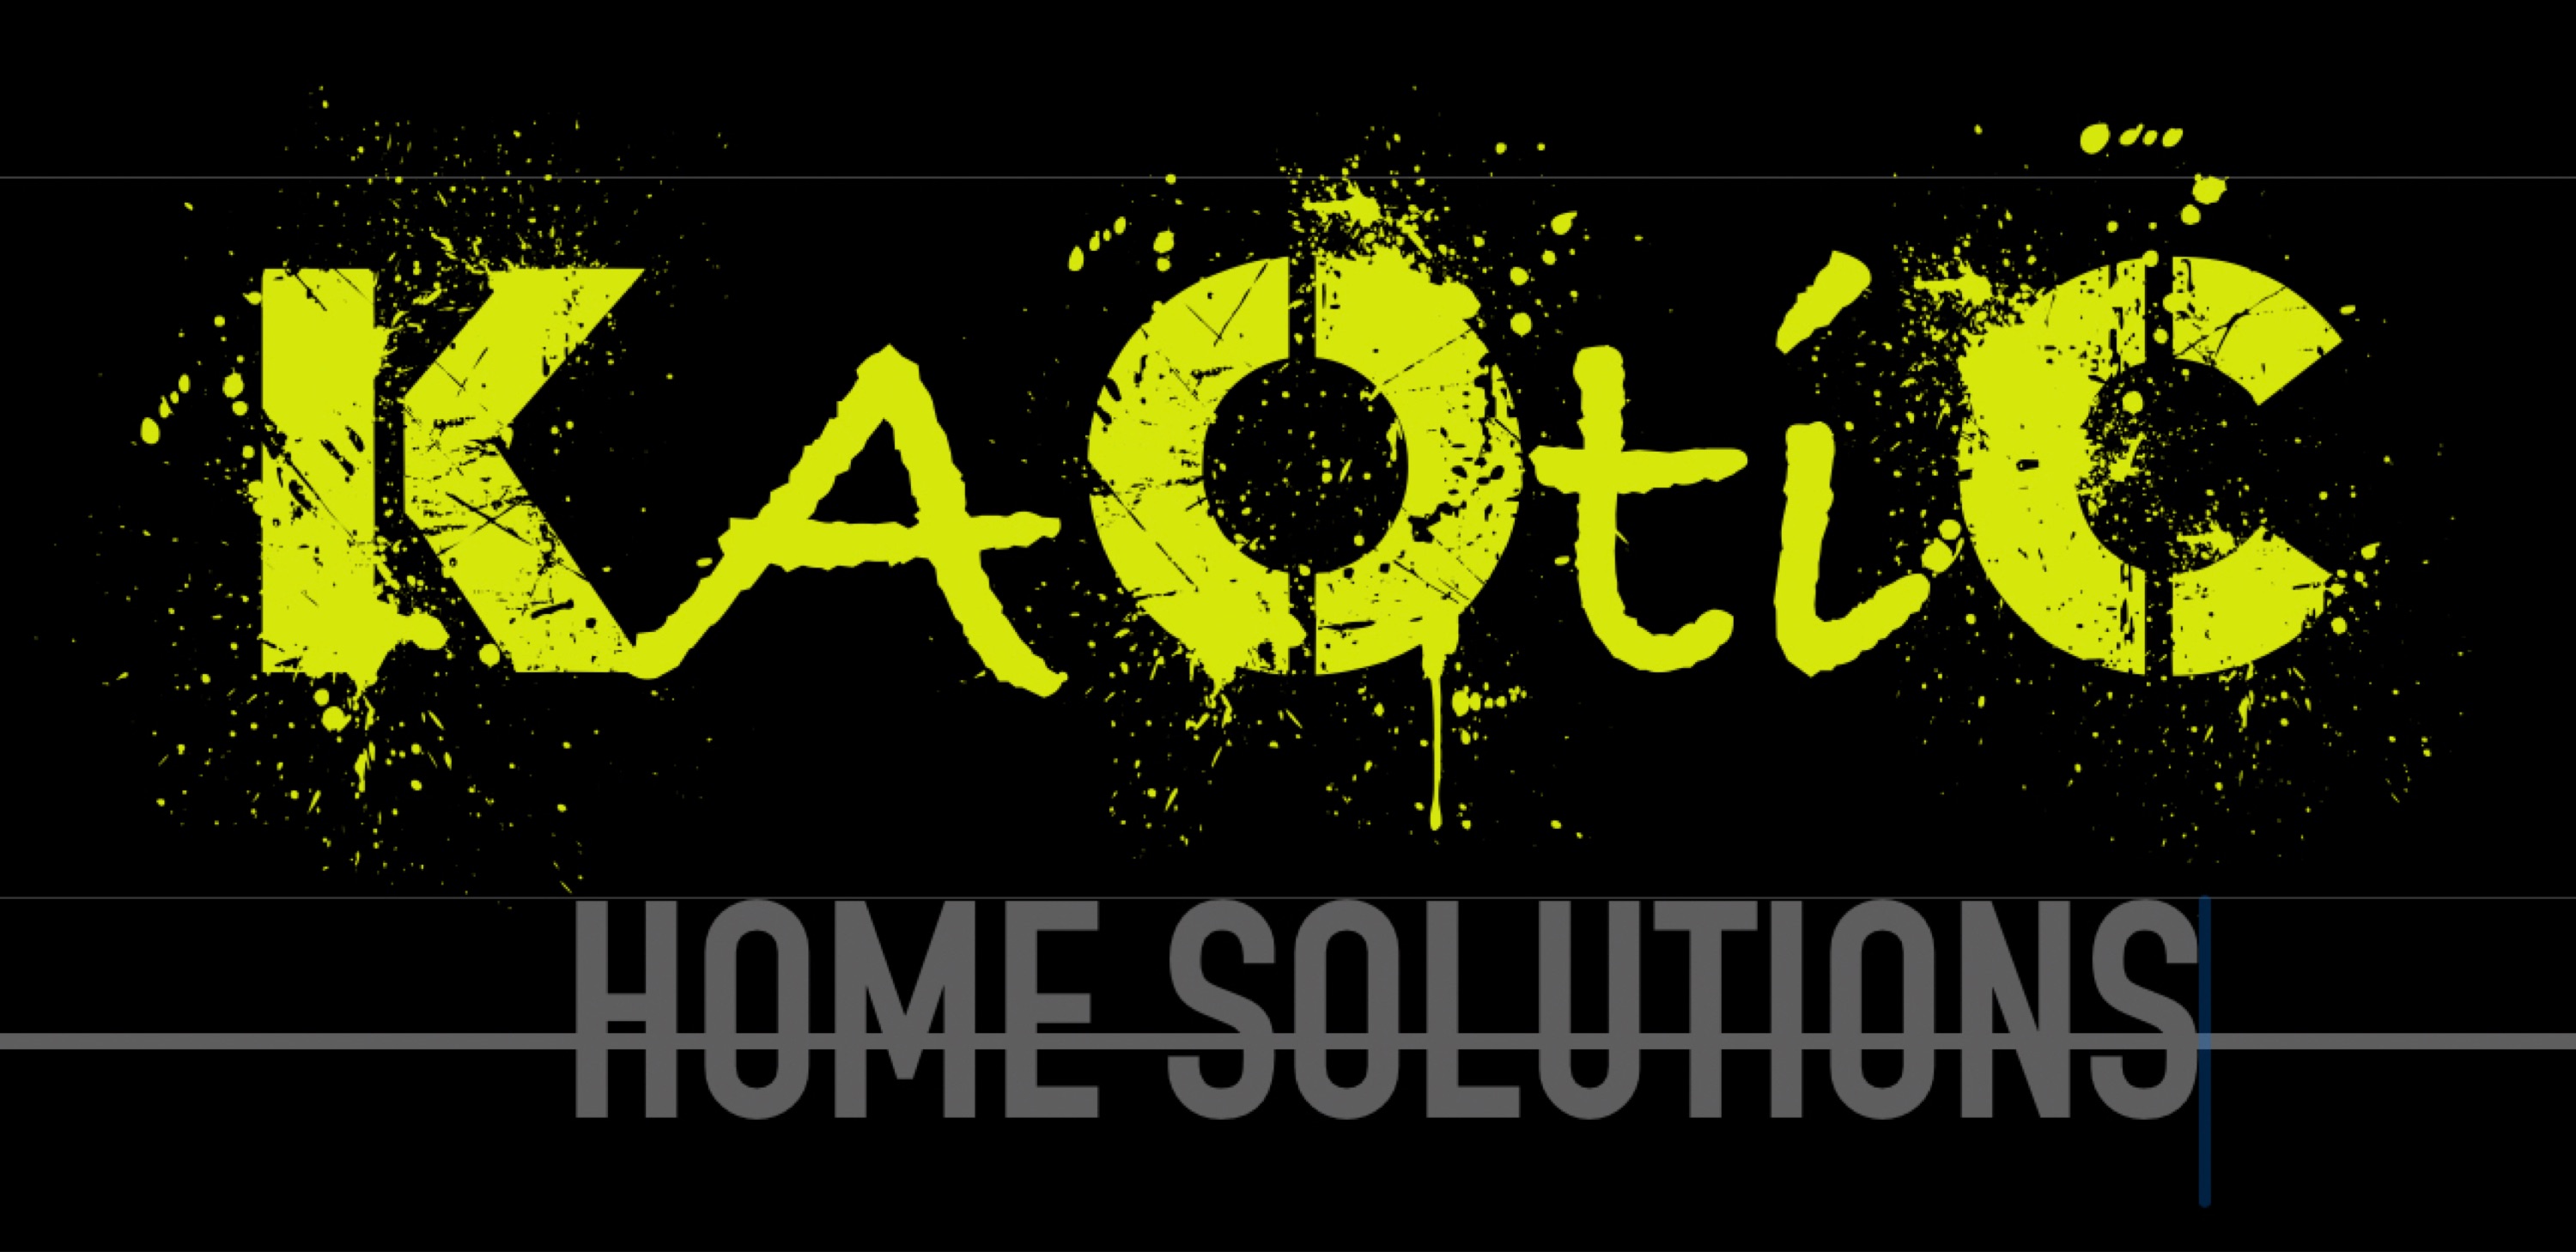 Kaotic Home Solutions Logo